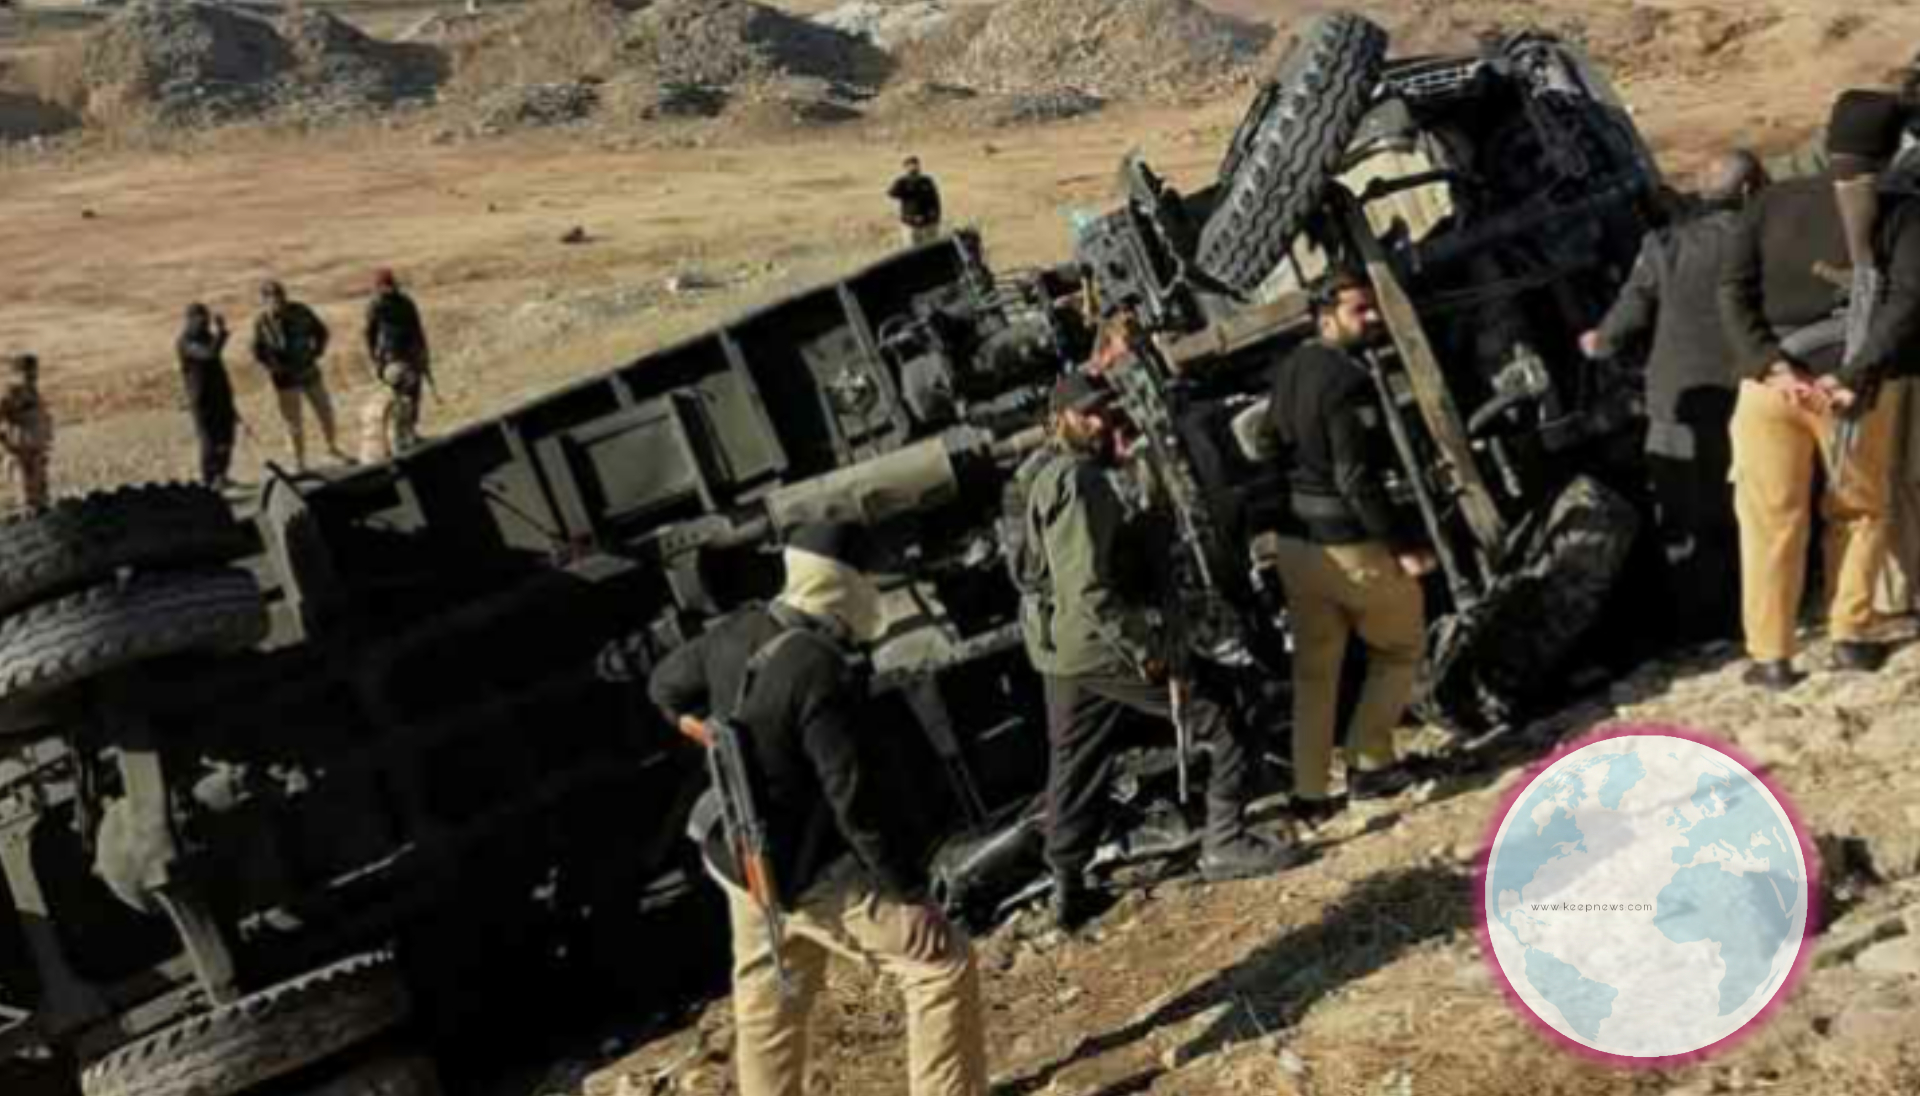 Attack Constabulary Truck in Quetta 27 Injured, One Child and Police Officer Killed